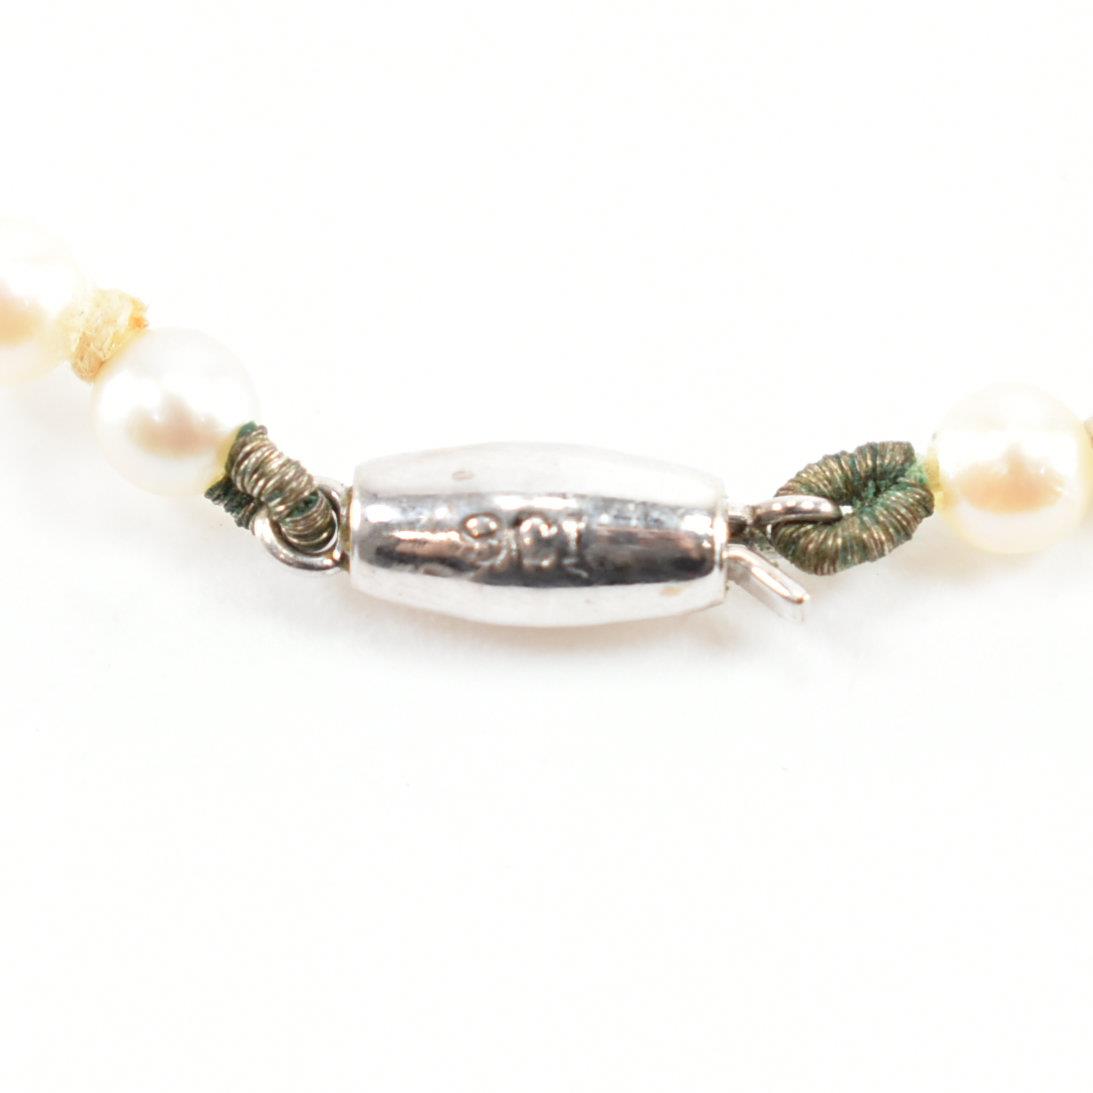 1930s 9CT GOLD & CULTURED PEARL NECKLACE - Image 4 of 4